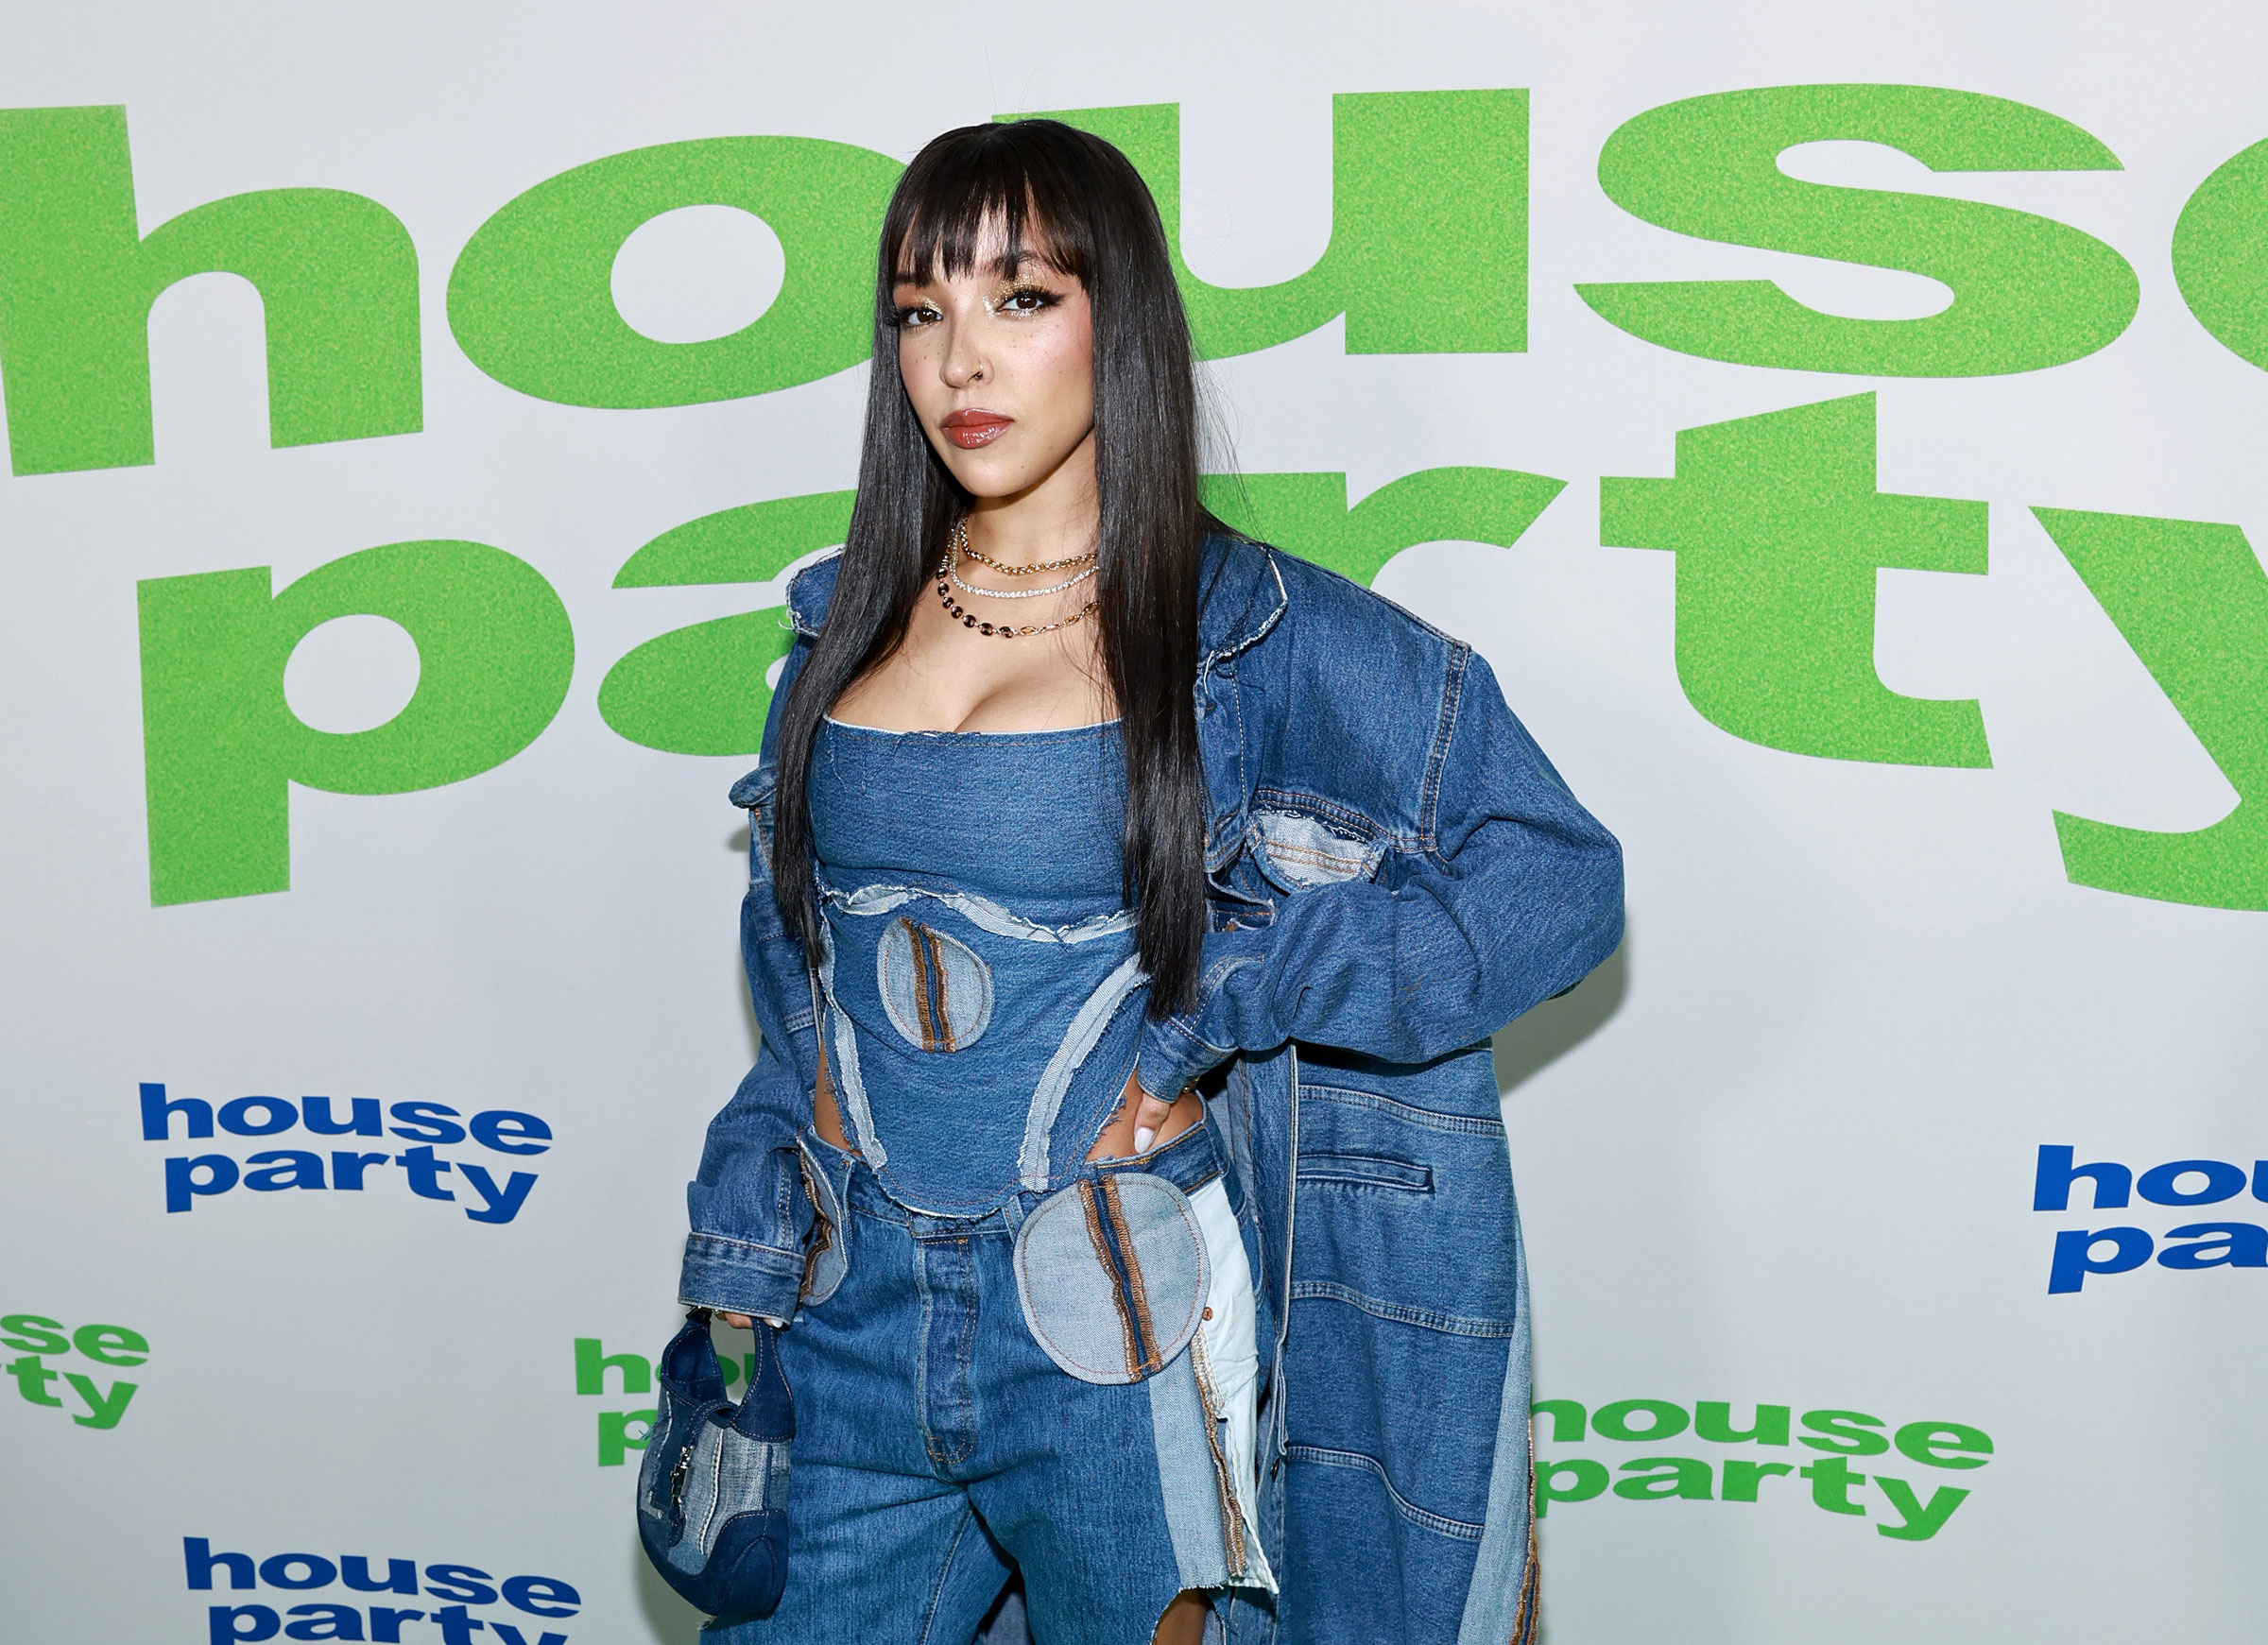 HOLLYWOOD, CALIFORNIA - JANUARY 11: Tinashe attends the Special Red Carpet Screening for New Line Cinema's "House Party" at TCL Chinese 6 Theatres on January 11, 2023 in Hollywood, California. (Photo by Matt Winkelmeyer/Getty Images) (Getty Images—2023 Getty Images)